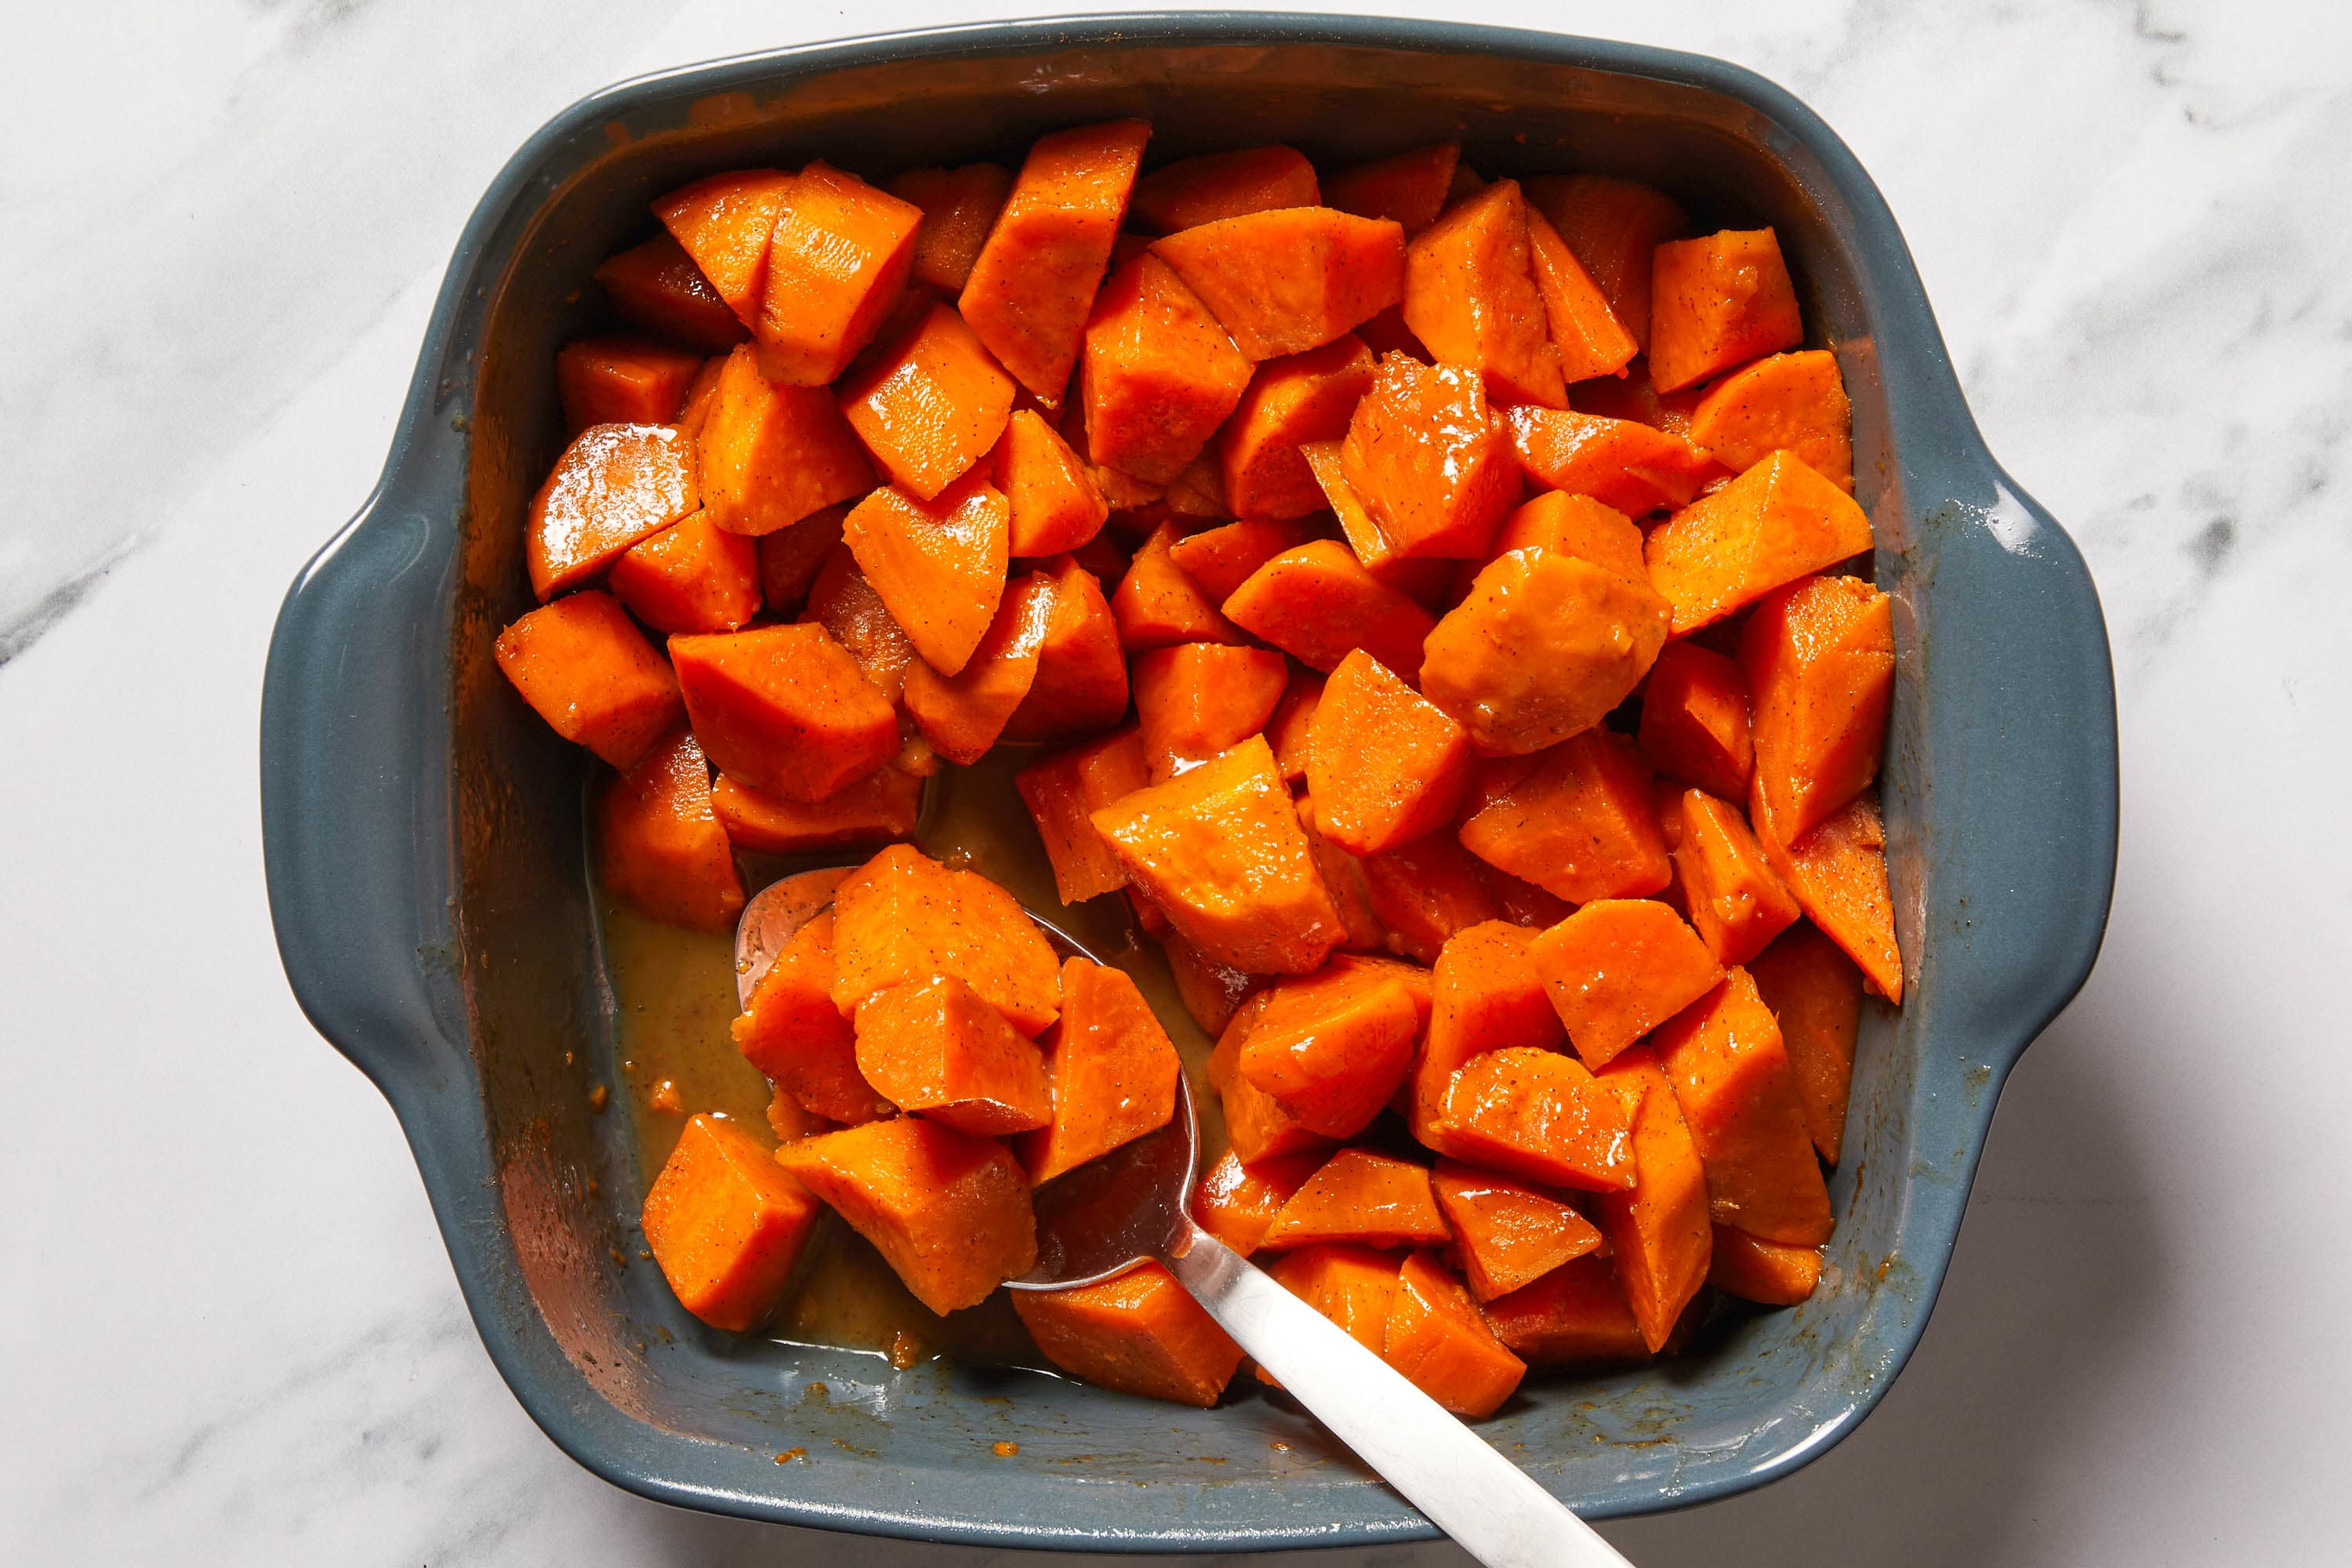 Candied Yams Recipe - NYT Cooking